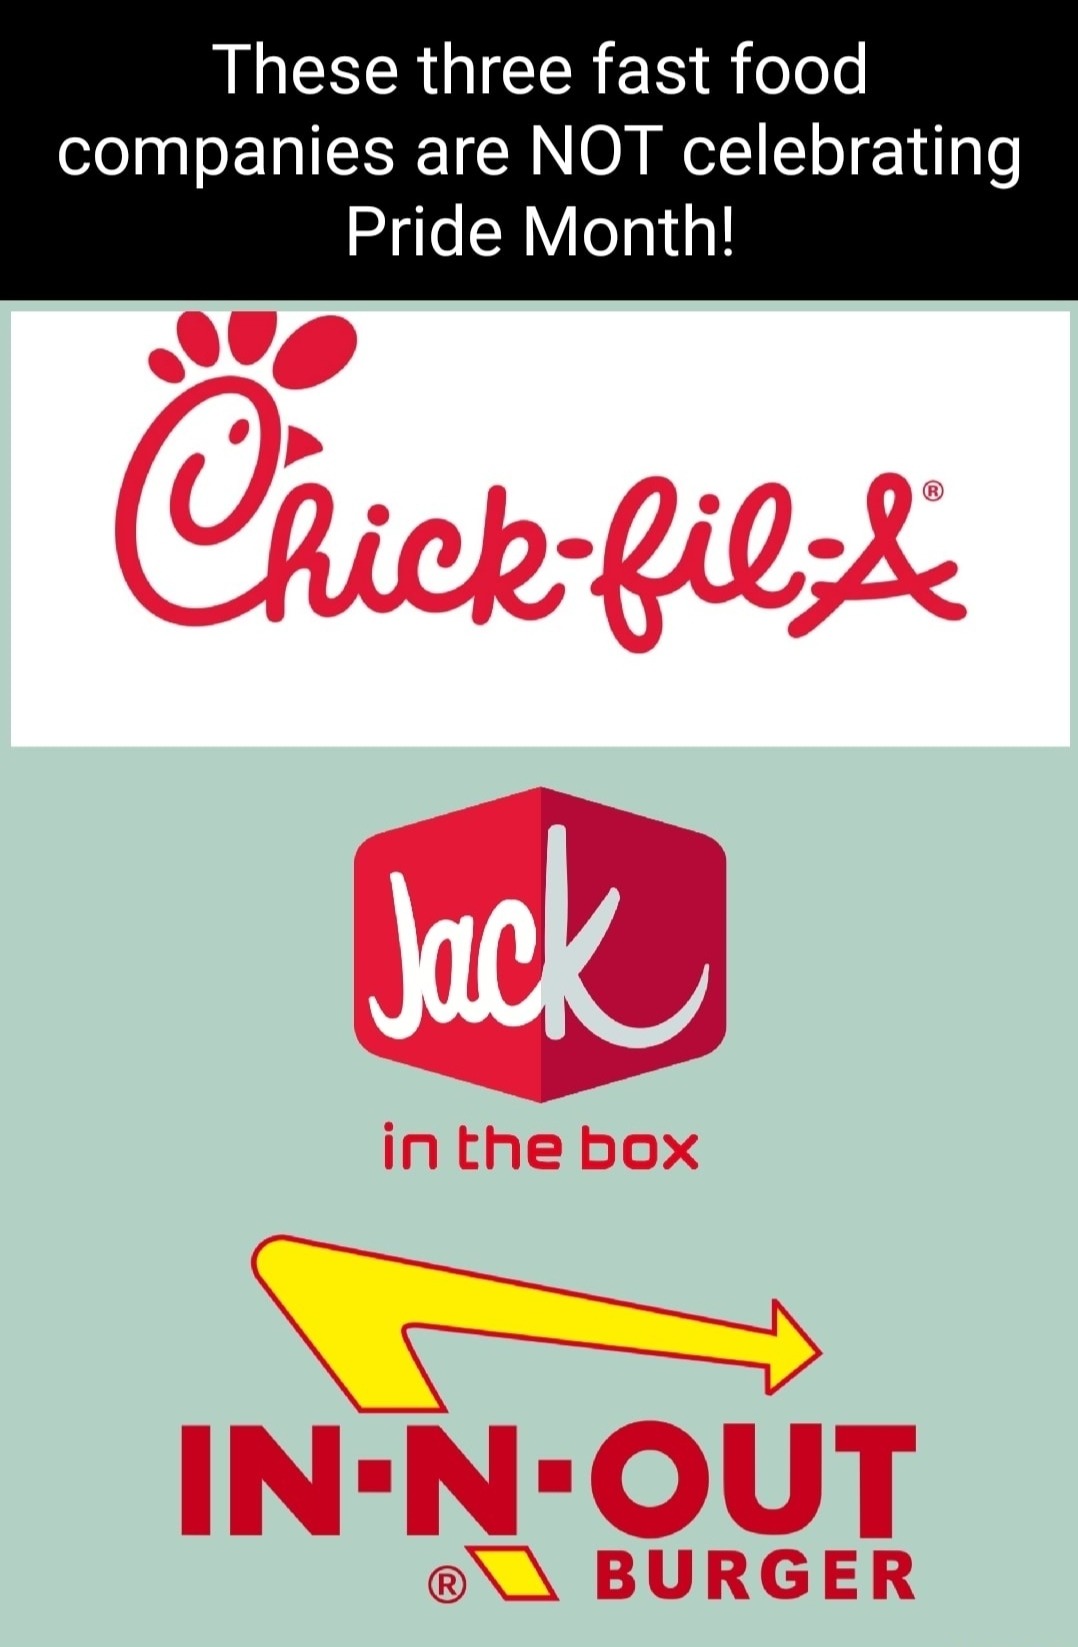 Based In-N-Out, CFA and Jack - meme